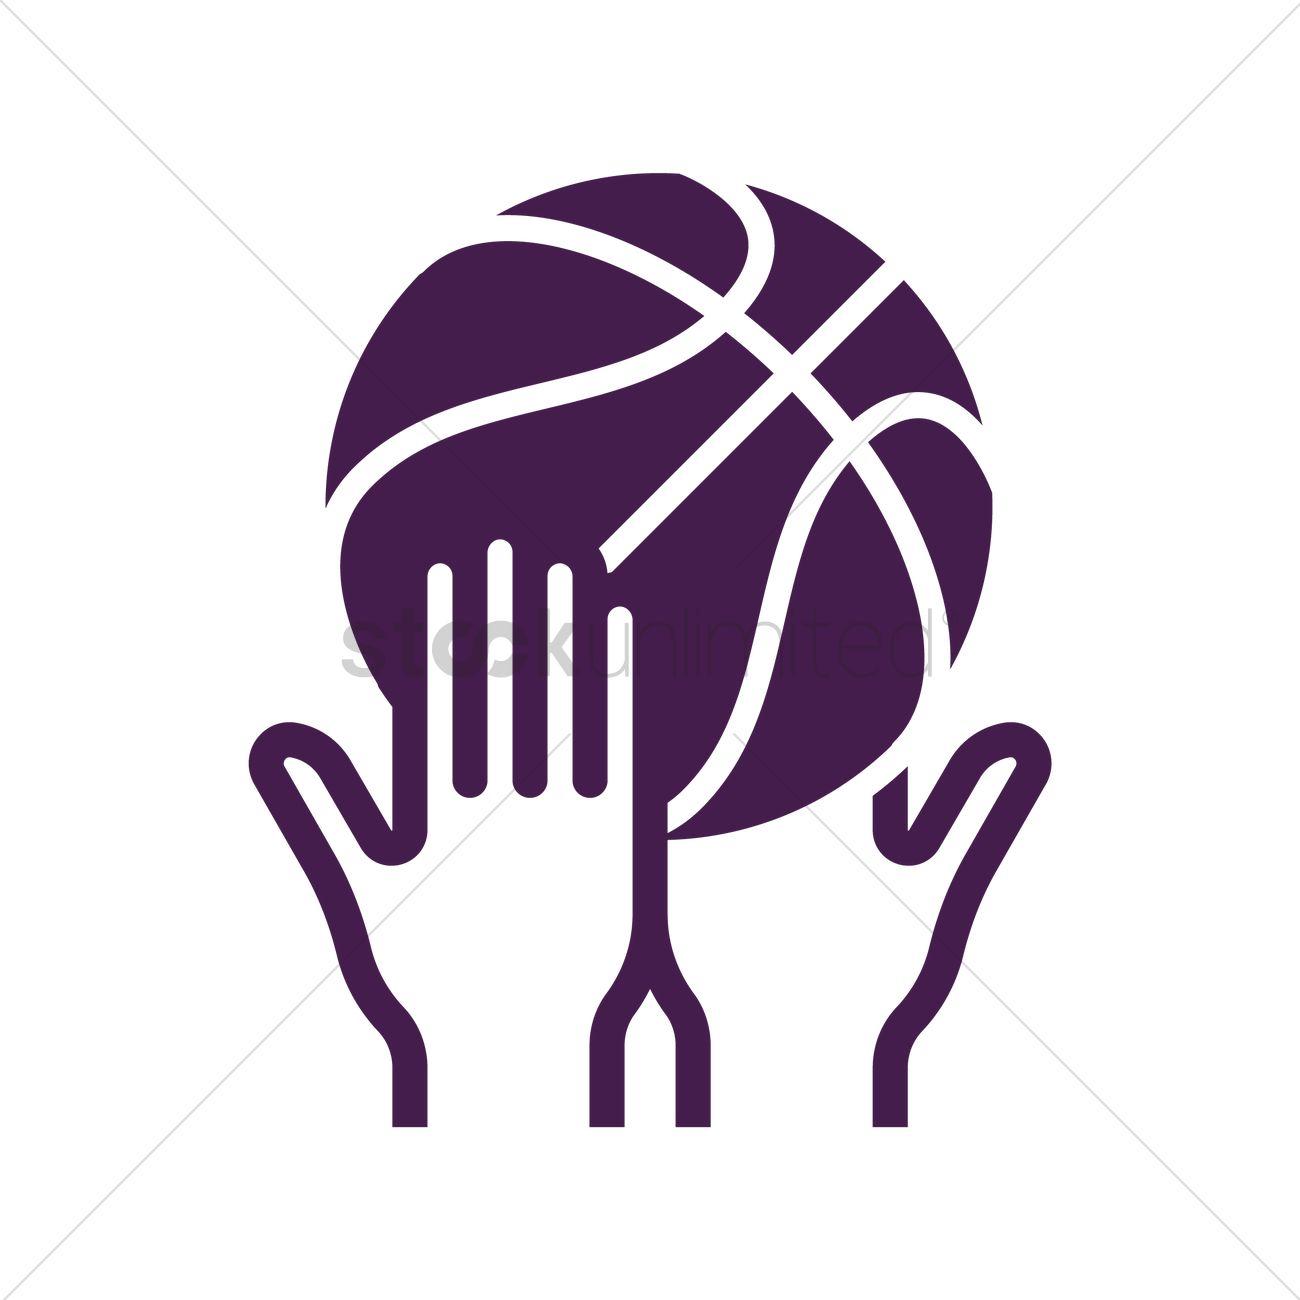 Basketball with Hands Logo - Hands blocking a basketball Vector Image - 1978700 | StockUnlimited